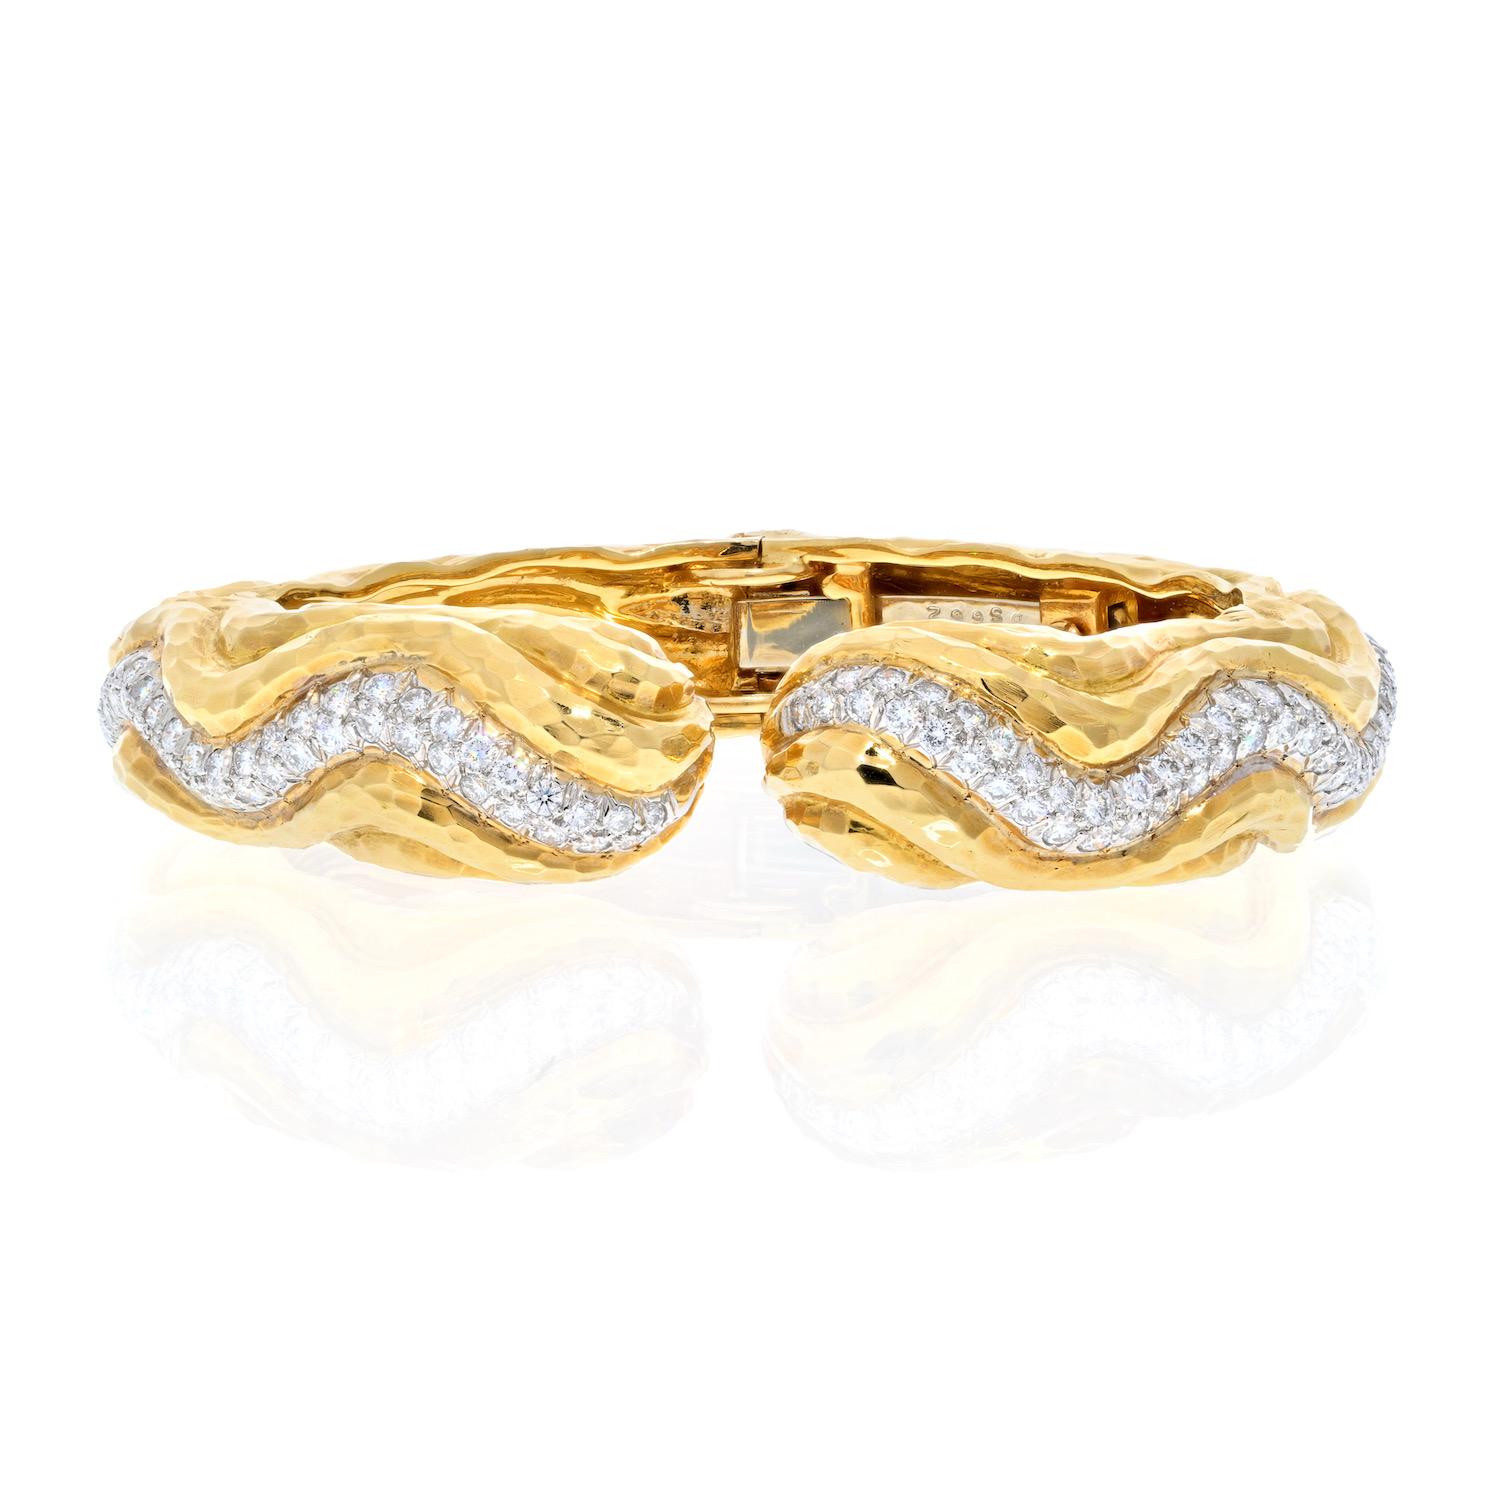 David Webb 18k gold and platinum wave bracelet, set with approx. 1.80ctw in H/VS diamonds. Bracelet will fit approx. 6.5 wrist and is 15mm wide. Weight is 69 grams. 
Marked David Webb, 18k, 900pt. 
Excellent condition, fun stackable item for your